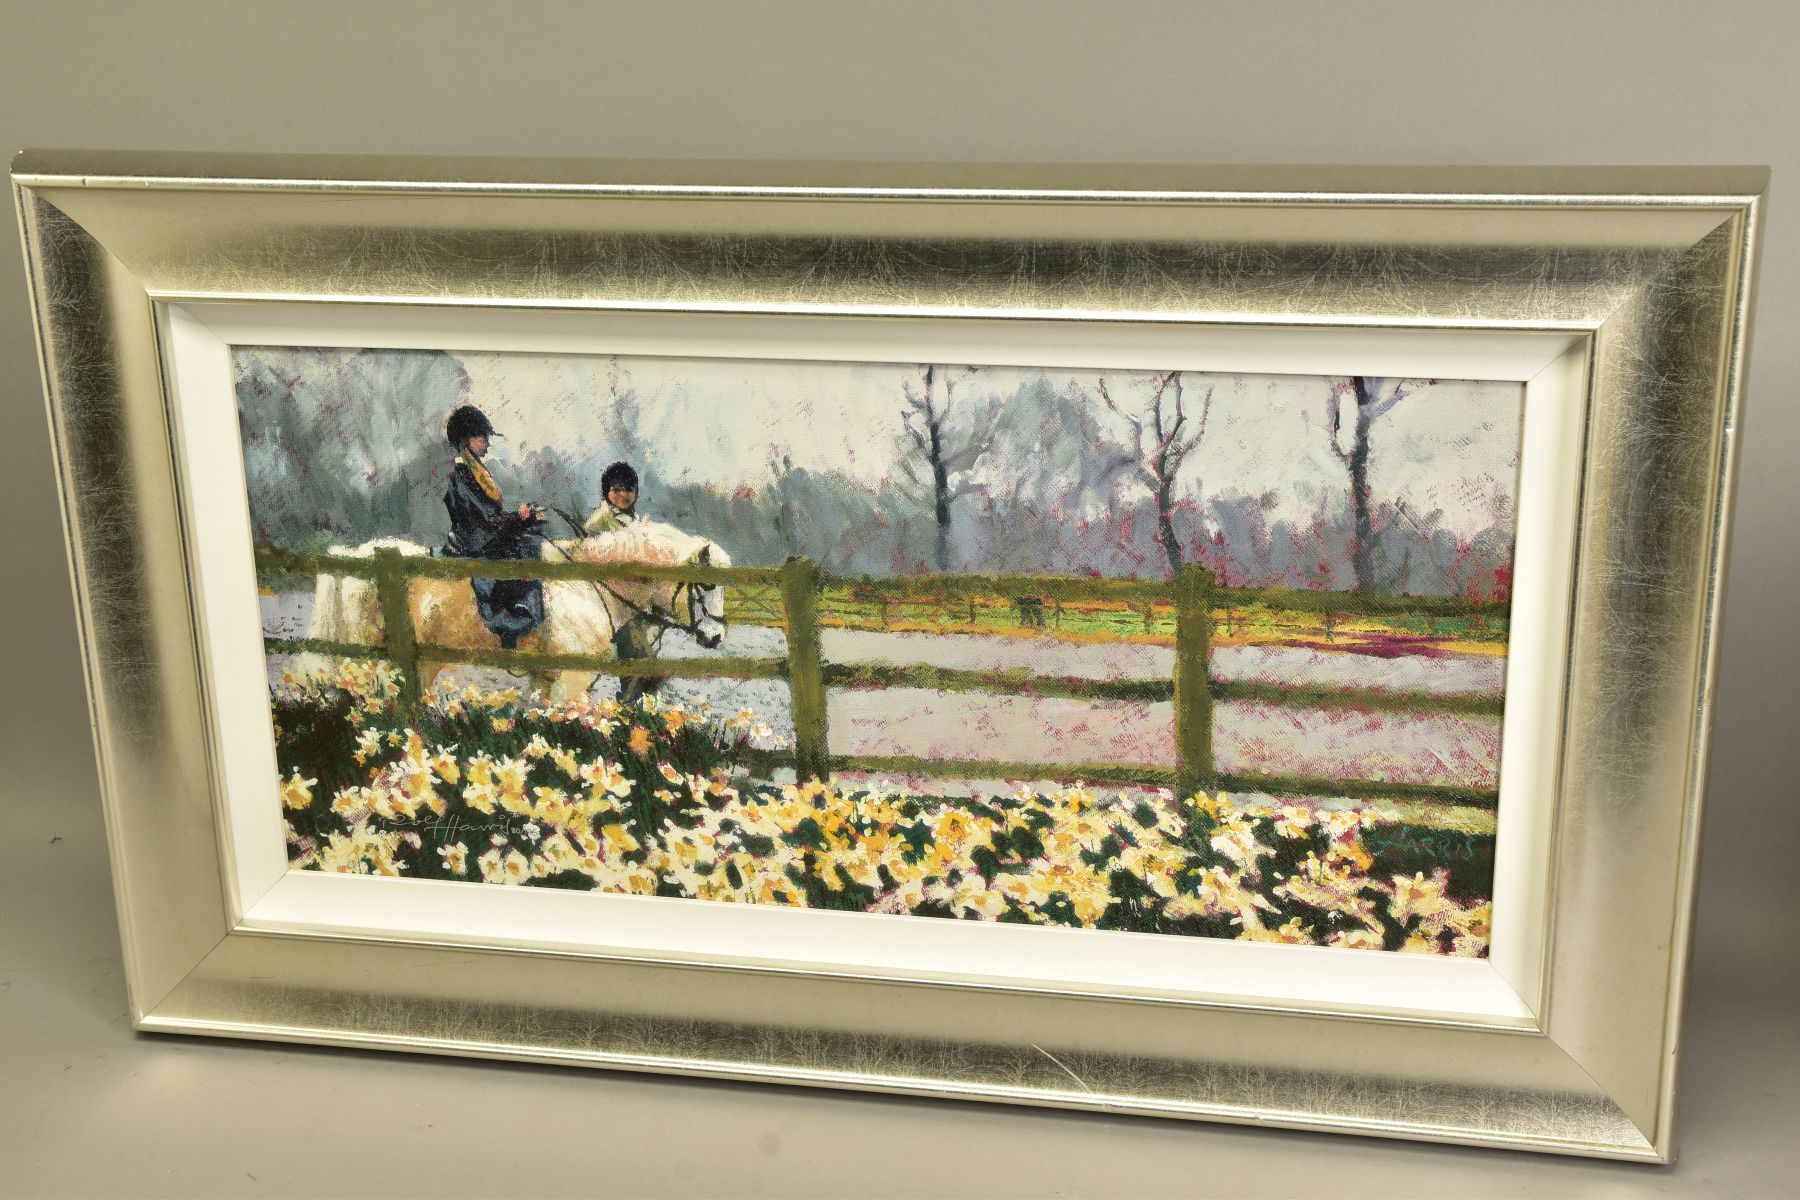 ROLF HARRIS (AUSTRALIAN 1930), 'RIDING IN THE SPRING', a limited edition print of a child riding a - Image 11 of 16